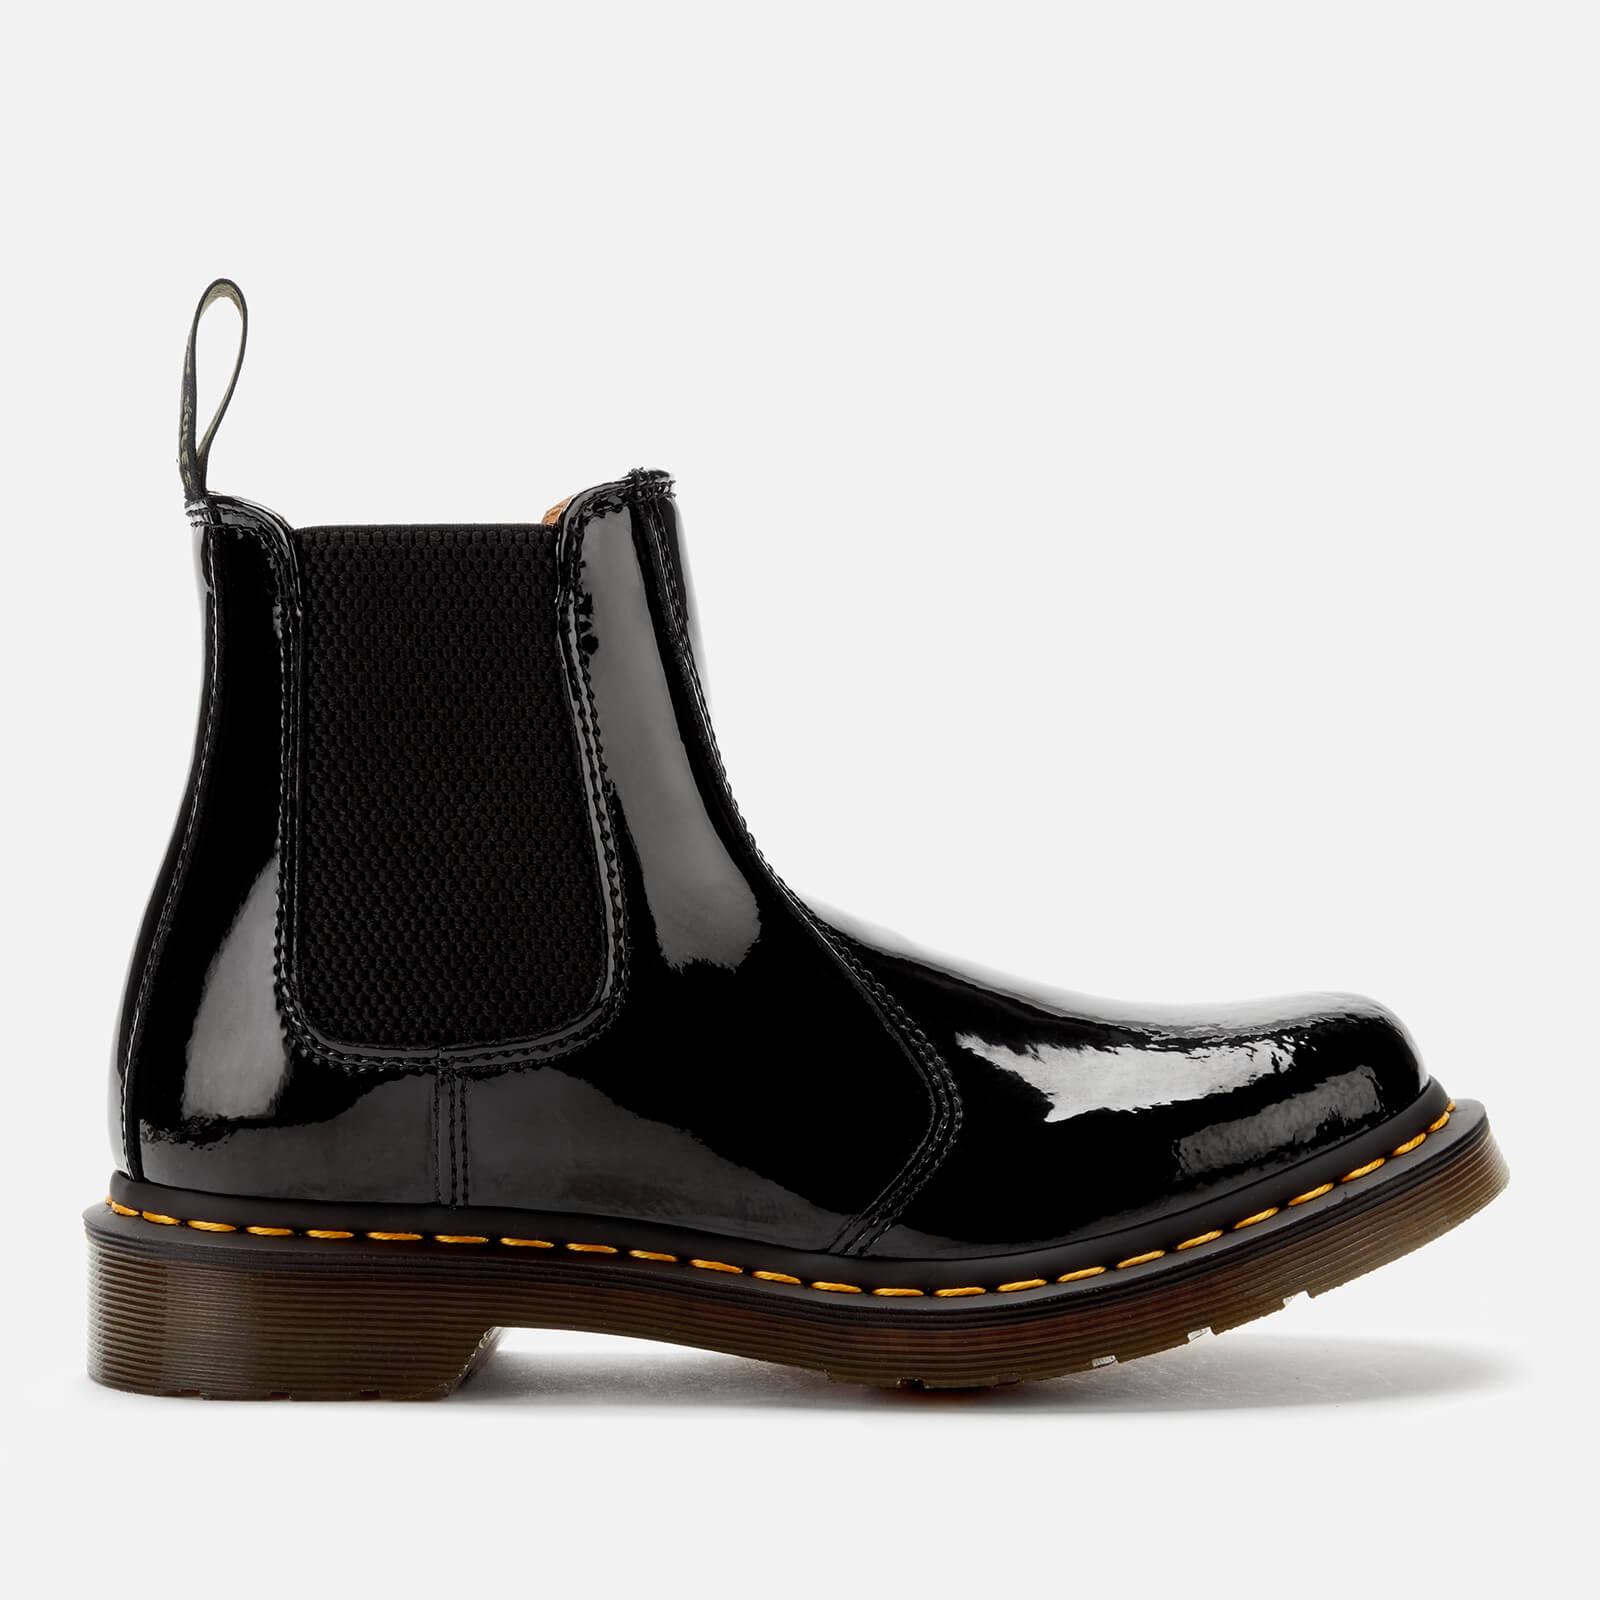 patent leather chelsea boots